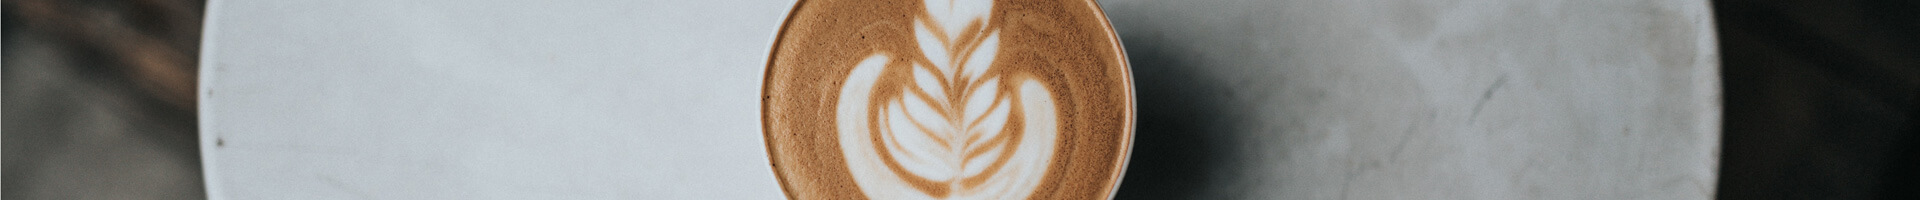 Latte art in a cup, viewed from above.